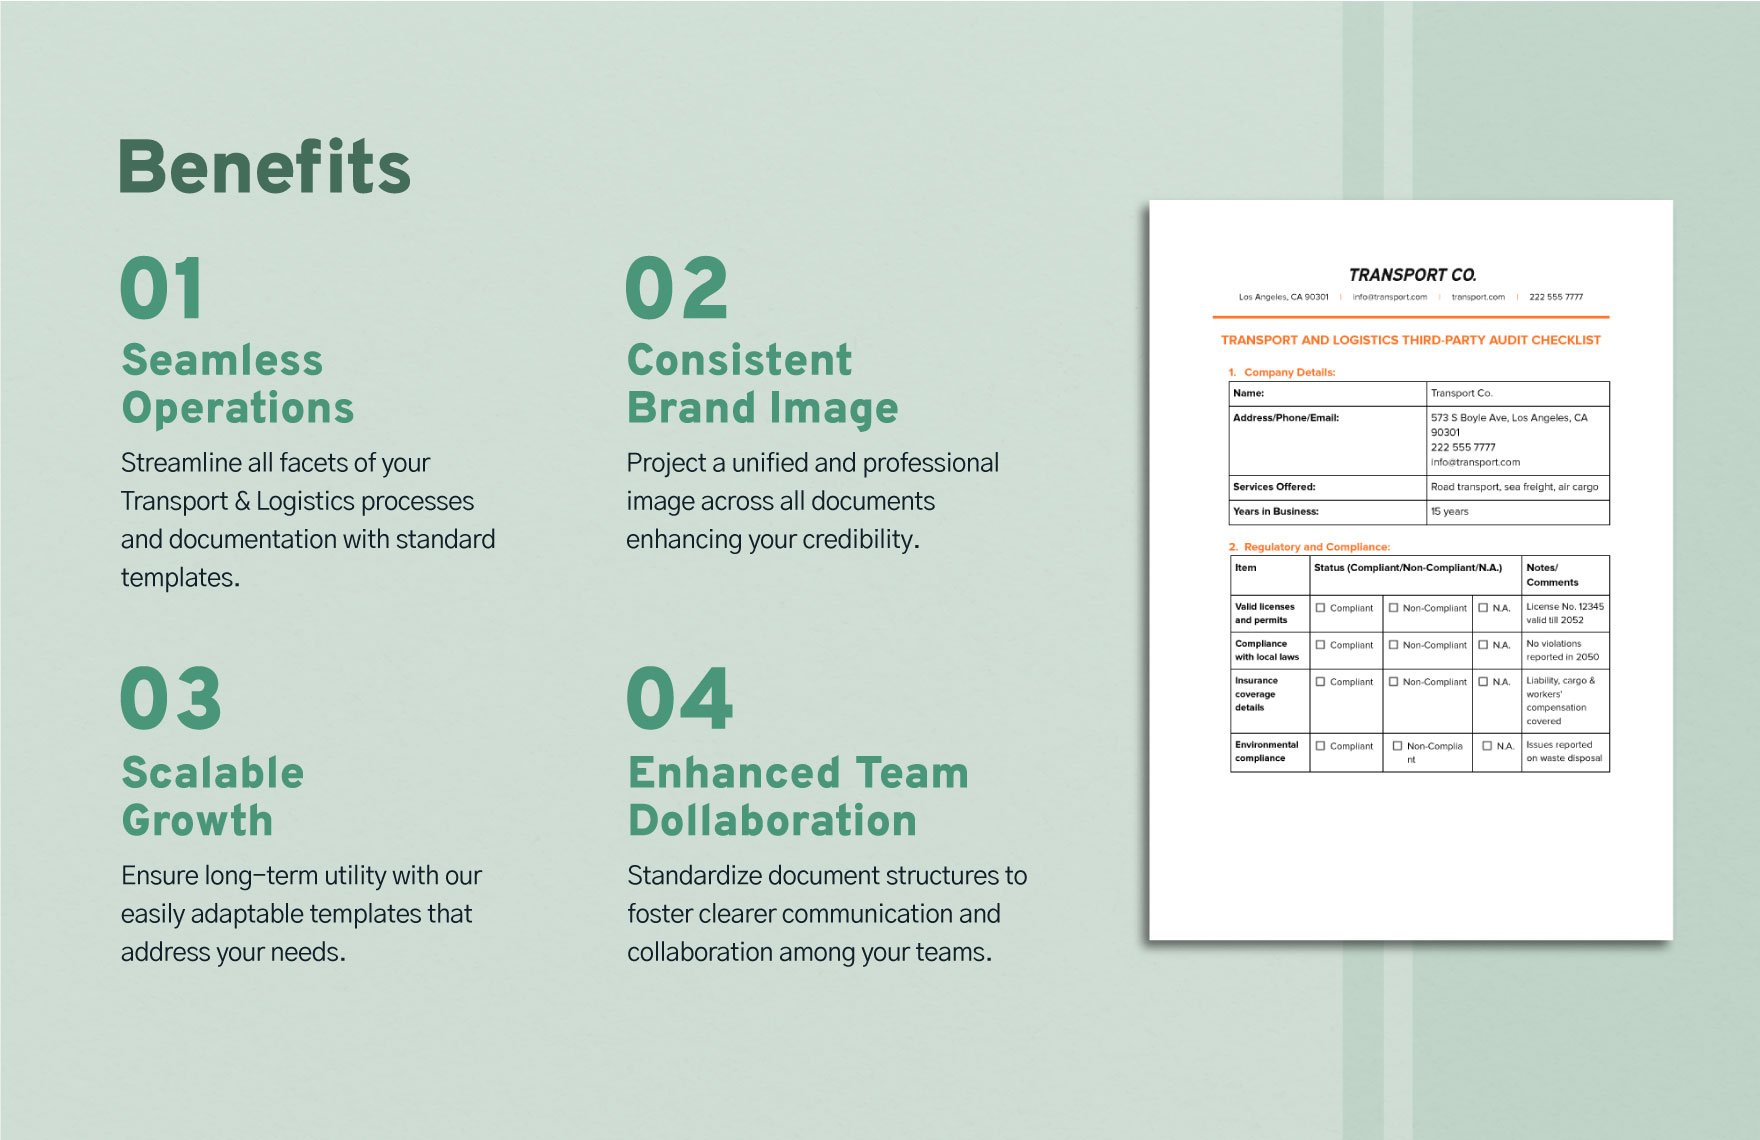 Transport and Logistics Third-Party Audit Checklist Template